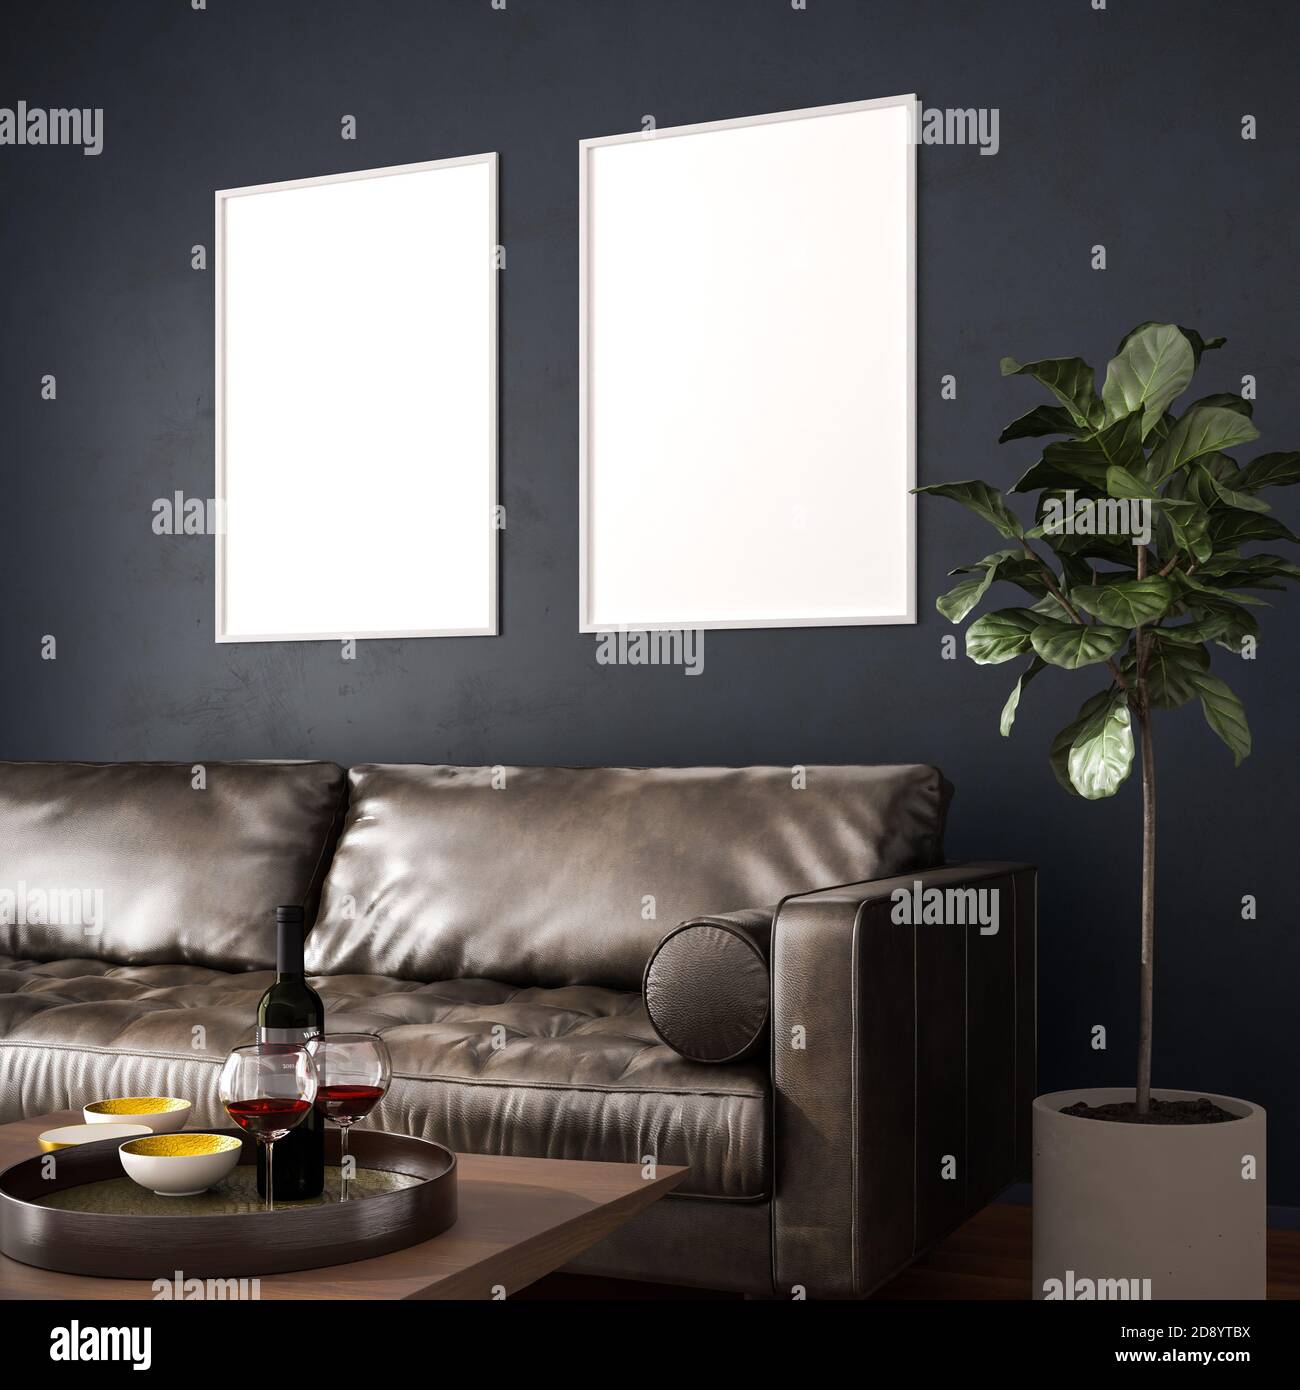 Elegant interior setting with dark wall, leather sofa, coffee table with wine and glasses,  ficus tree. Two picture frame mockups (70x100cm). 3d rende Stock Photo